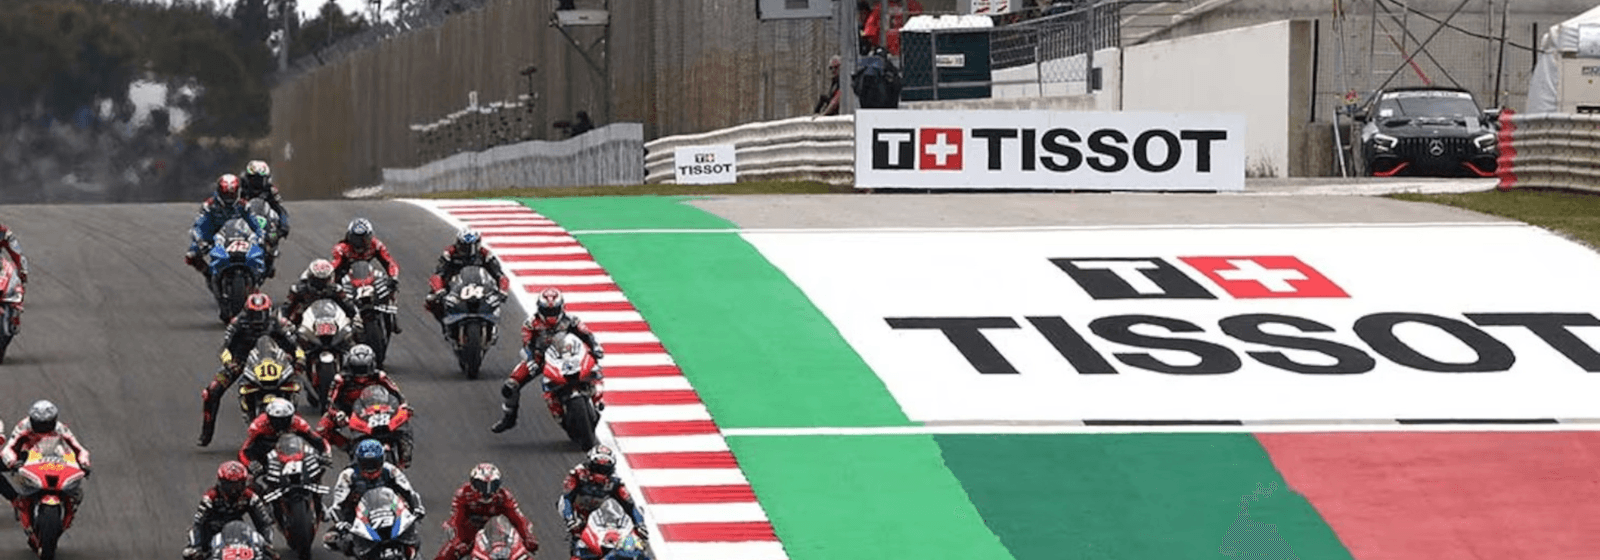 The Fast-Laned World of MotoGP and its Enduring Partnership with Tissot